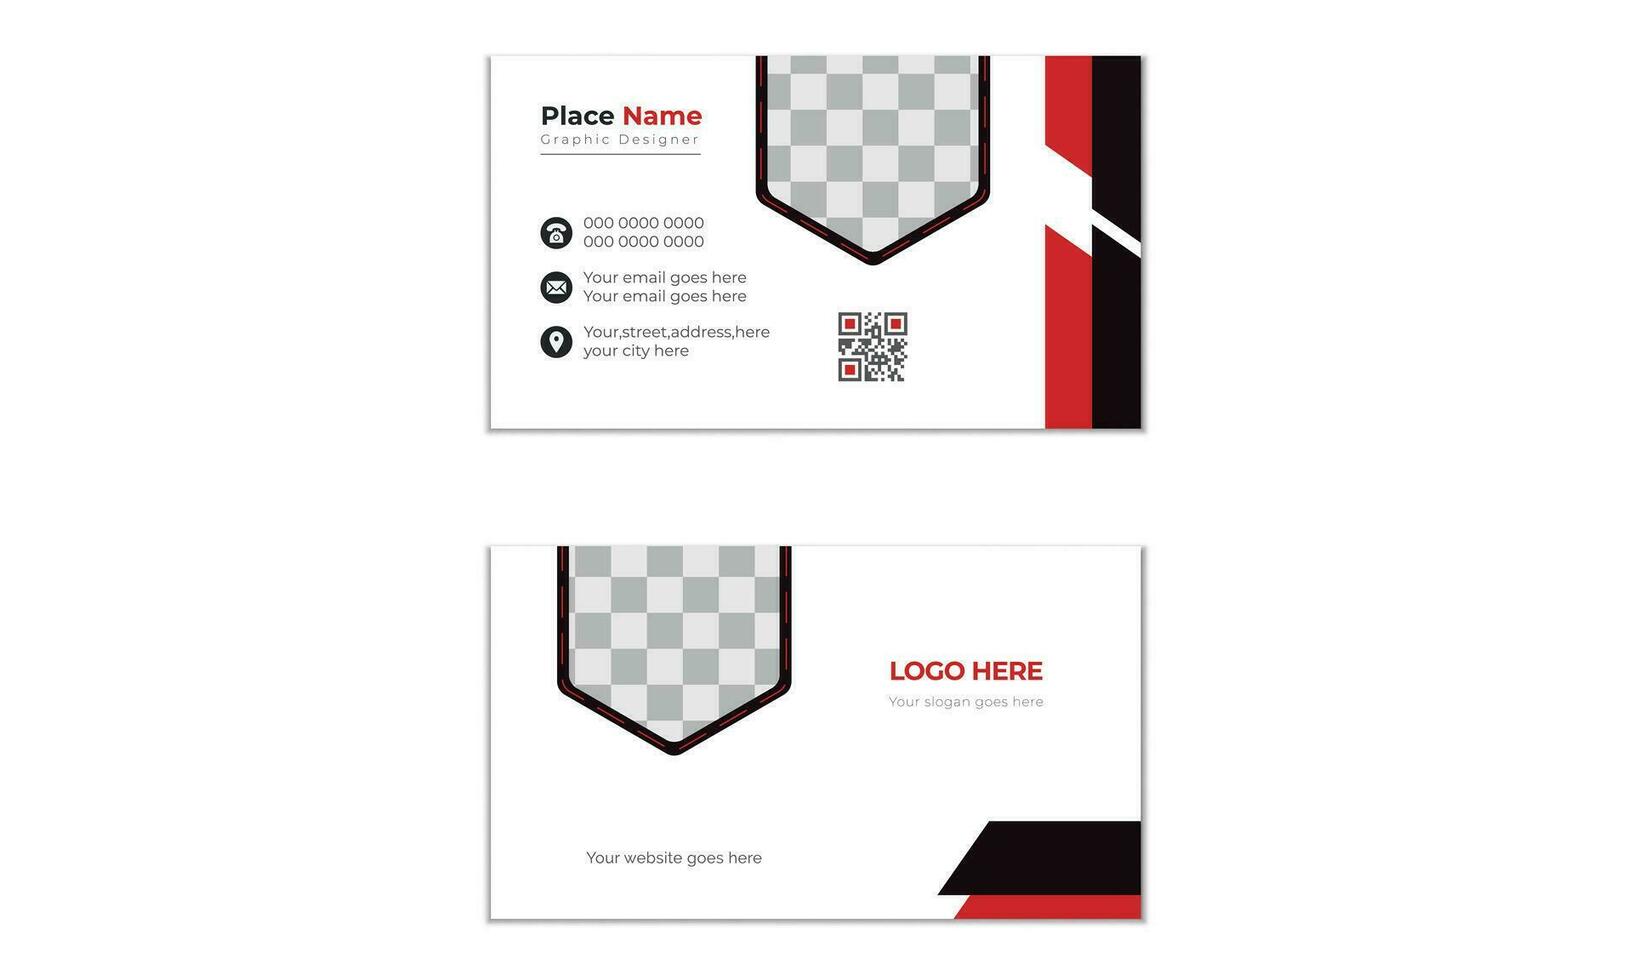 Simple and Creative Professional Corporate Business Card Template Design With Layout Free Vector